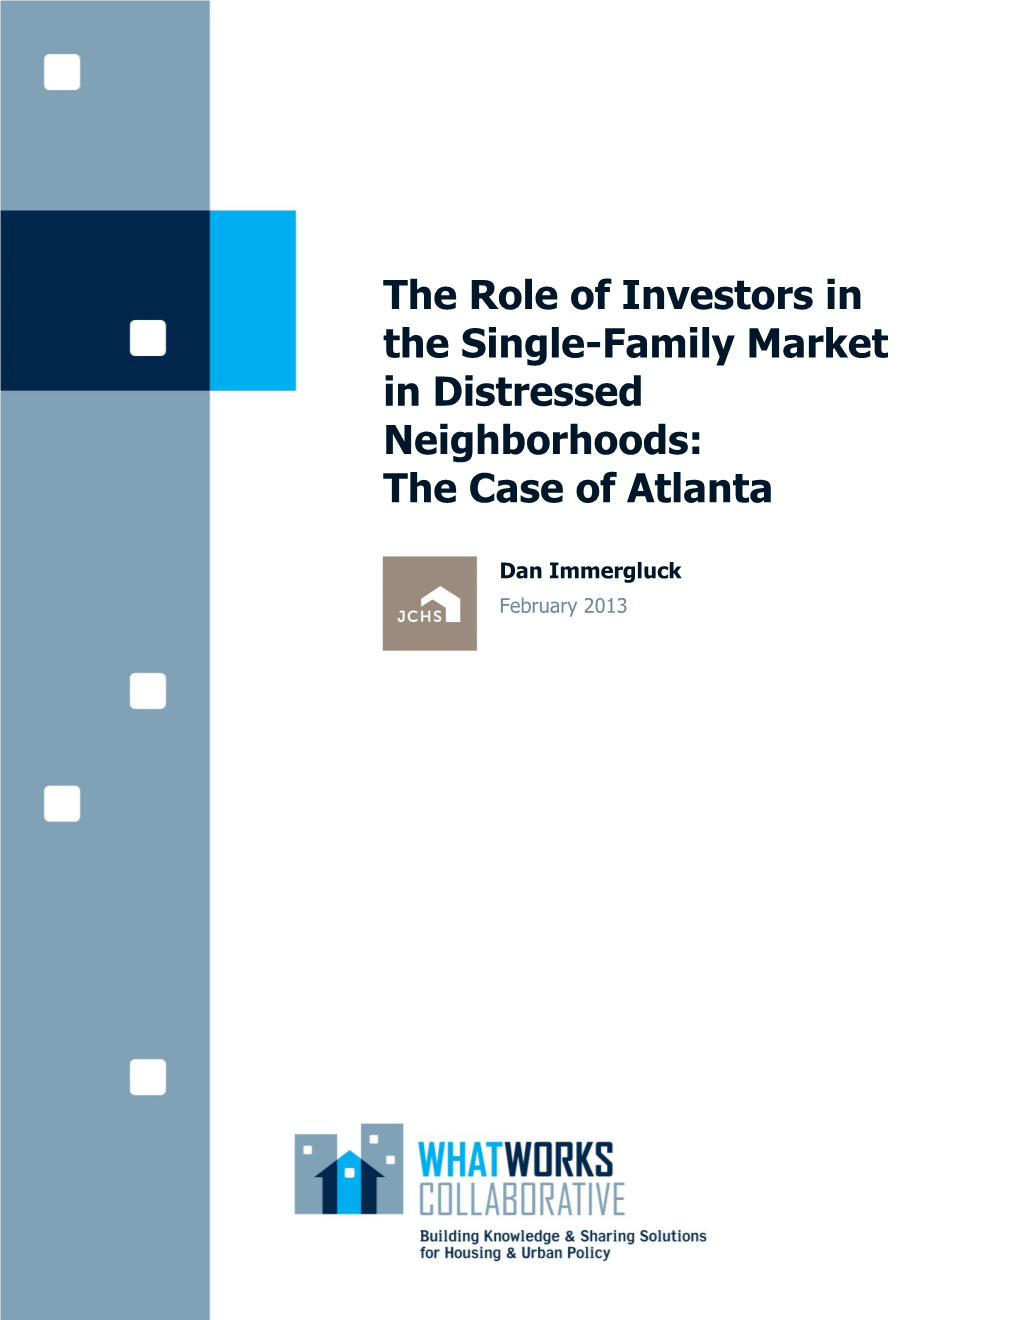 The Role of Investors in the Single-Family Market in Distressed Neighborhoods: the Case of Atlanta